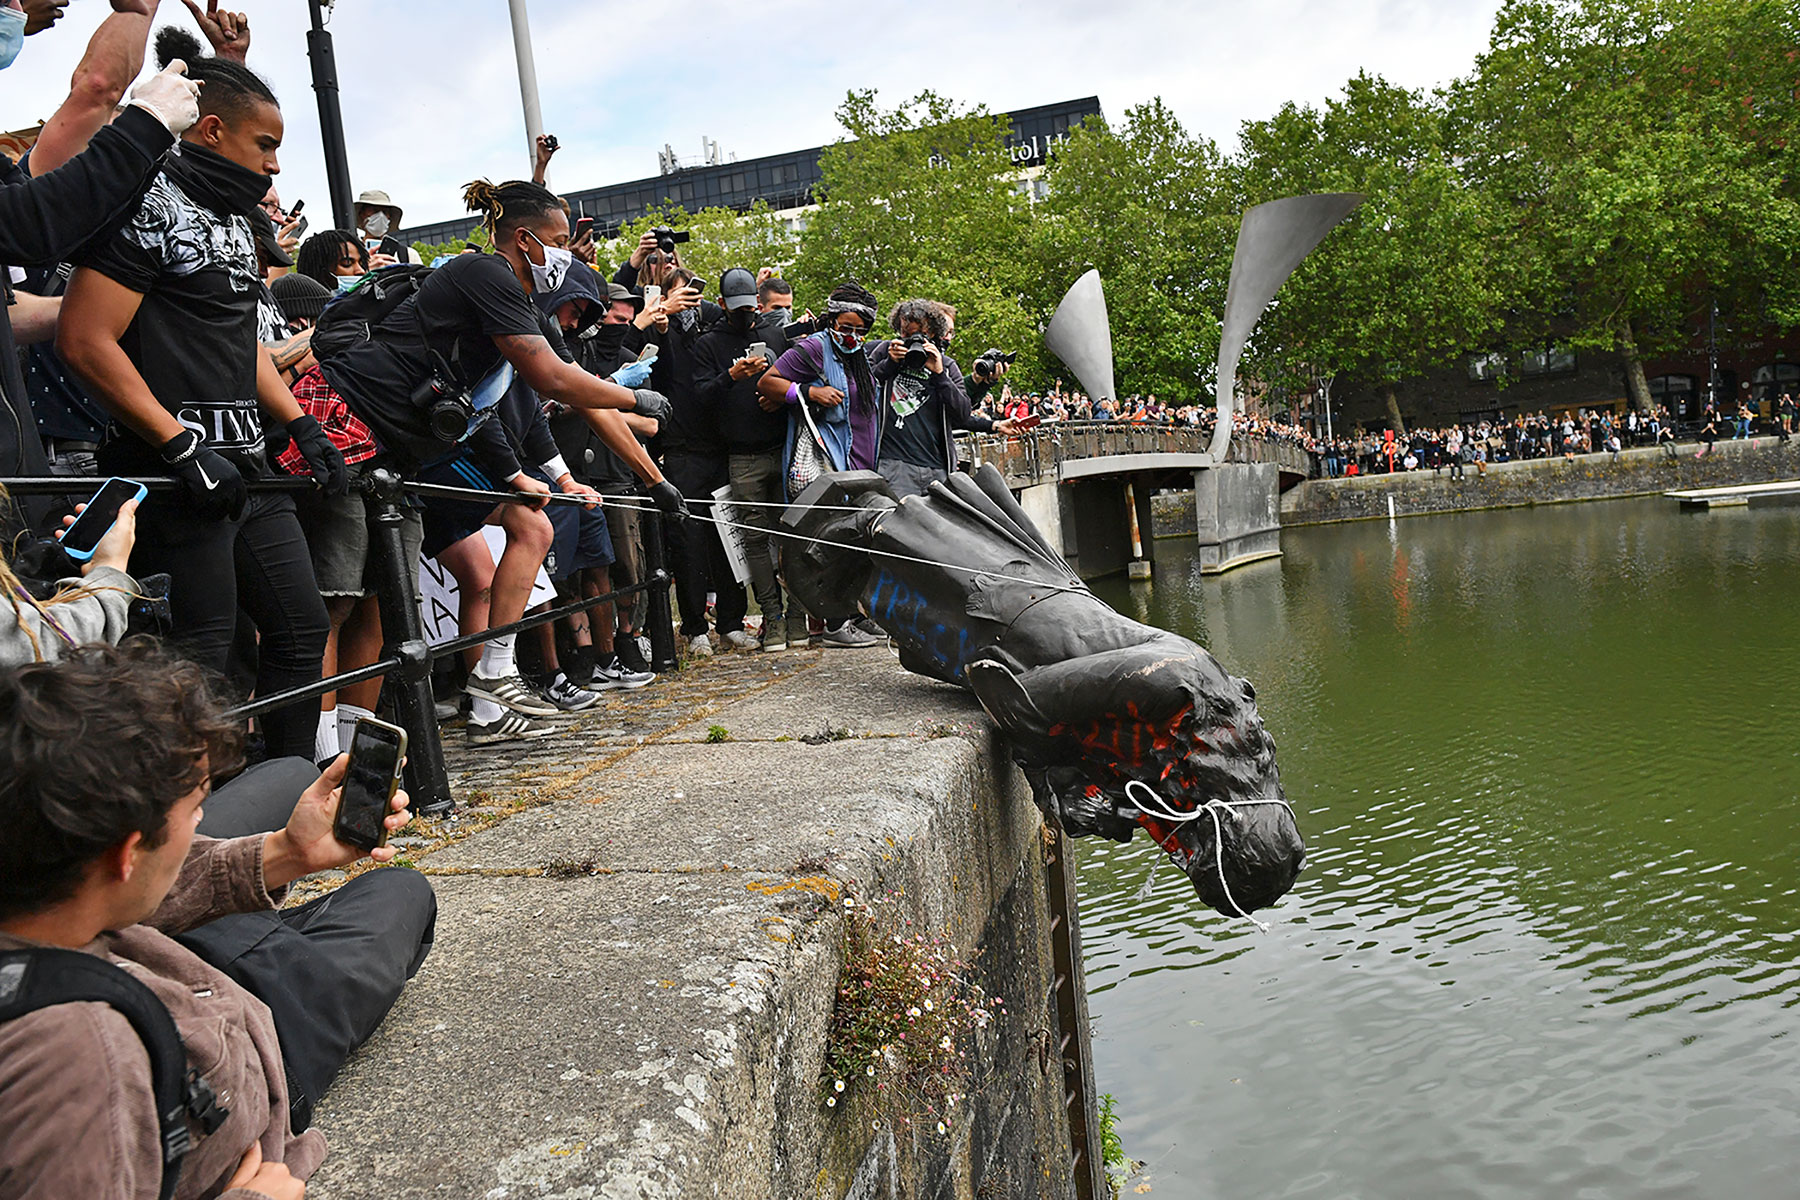 The statue of Edward Colston is thrown into the harbor of Bristol in southwest England, June 7, 2020. (Ben Birchall—PA Wire/AP)